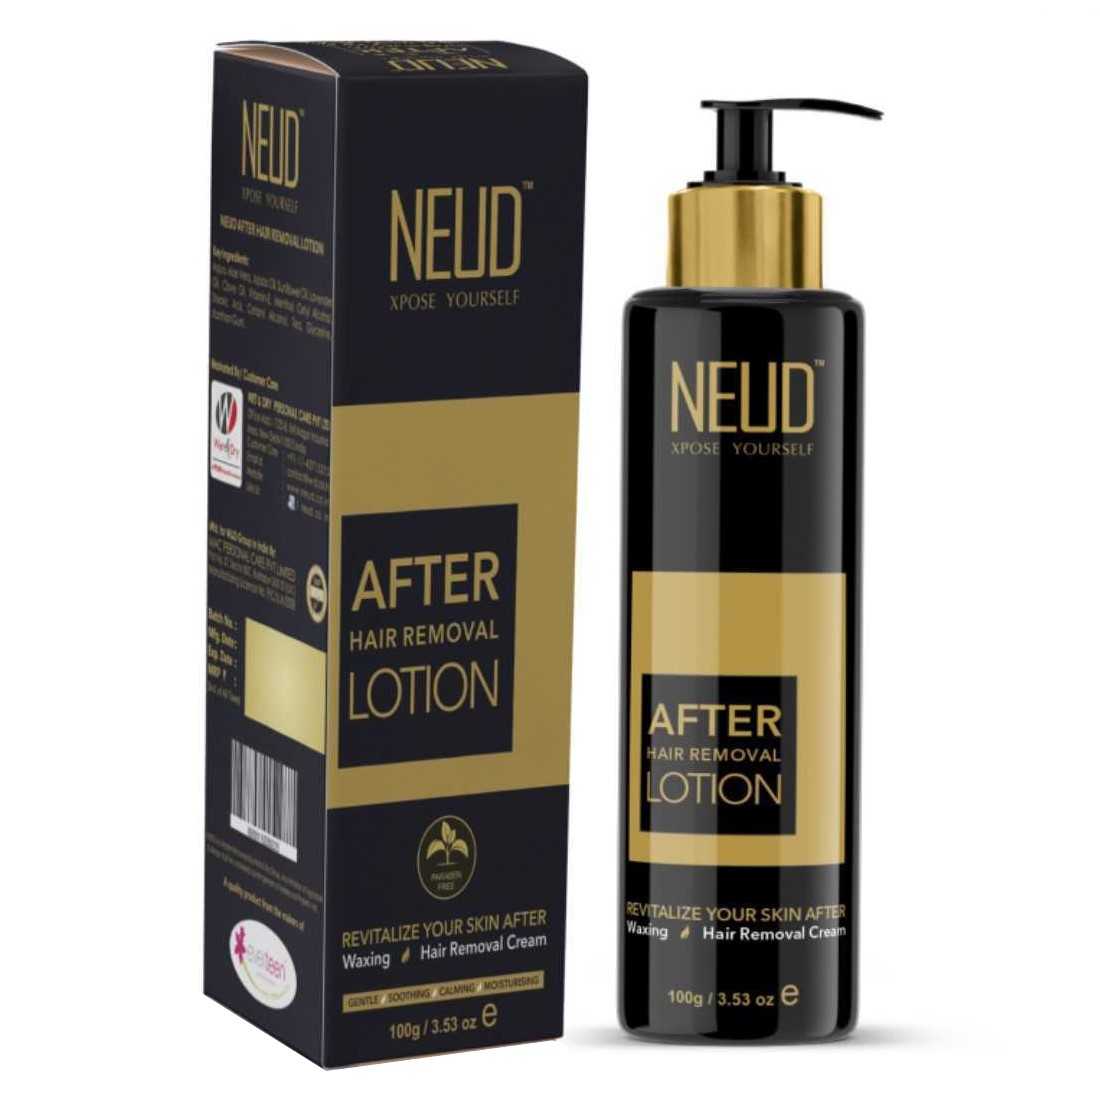 NEUD Combo Natural Hair Inhibitor (80 g) and After-Hair-Removal Lotion (100 g) for Men and Women